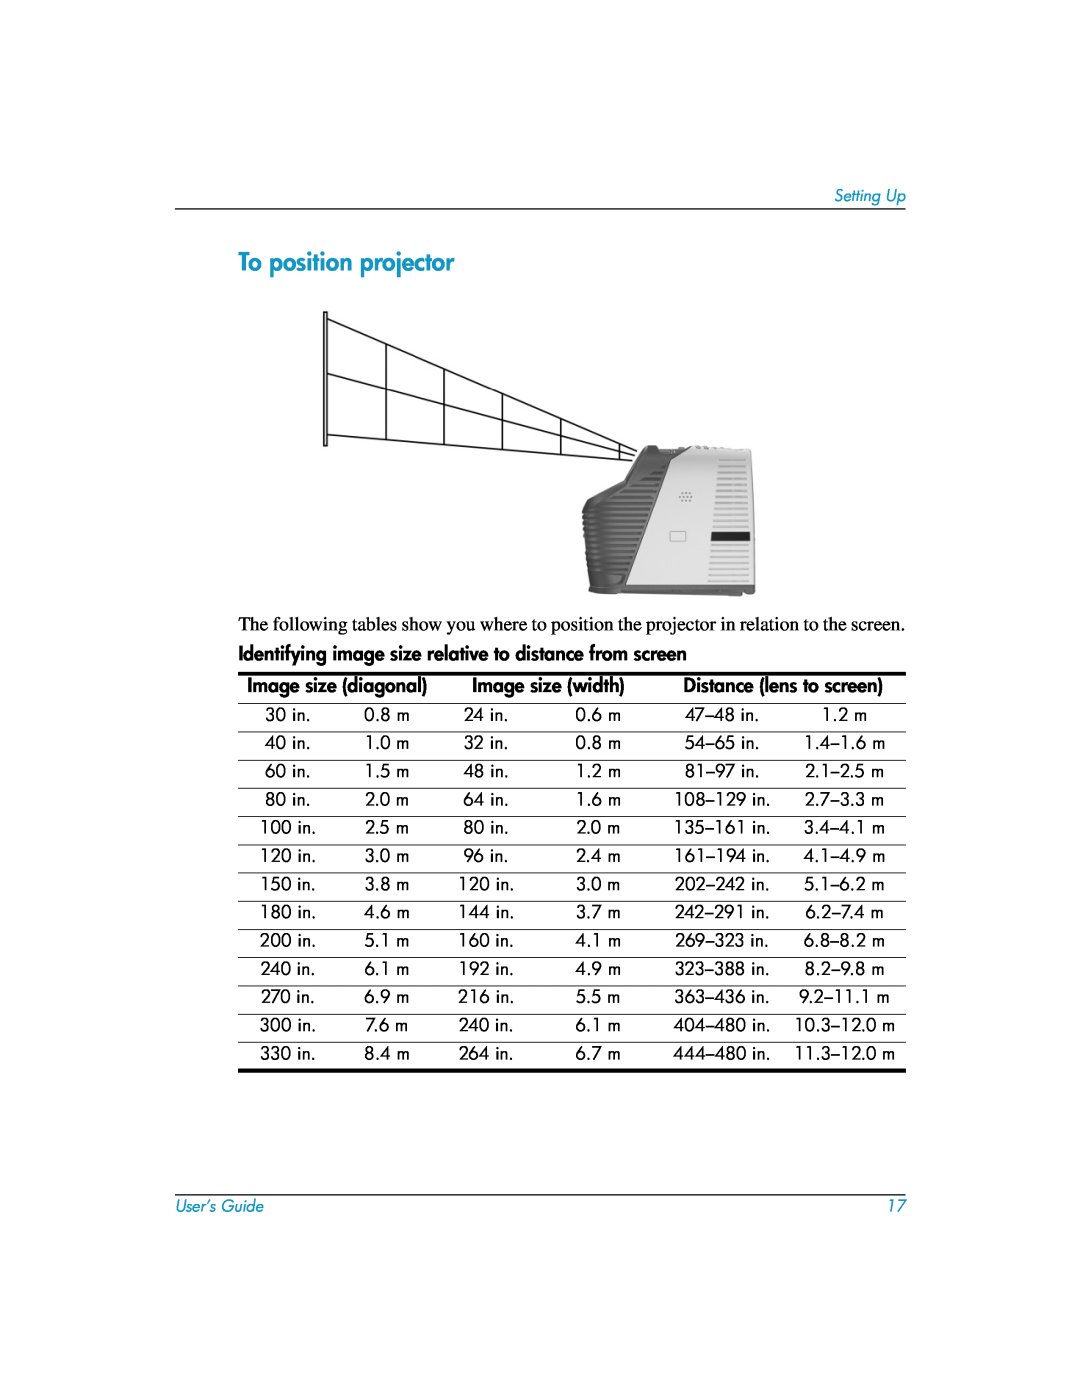 HP mp3135w manual To position projector, Identifying image size relative to distance from screen, Image size diagonal 